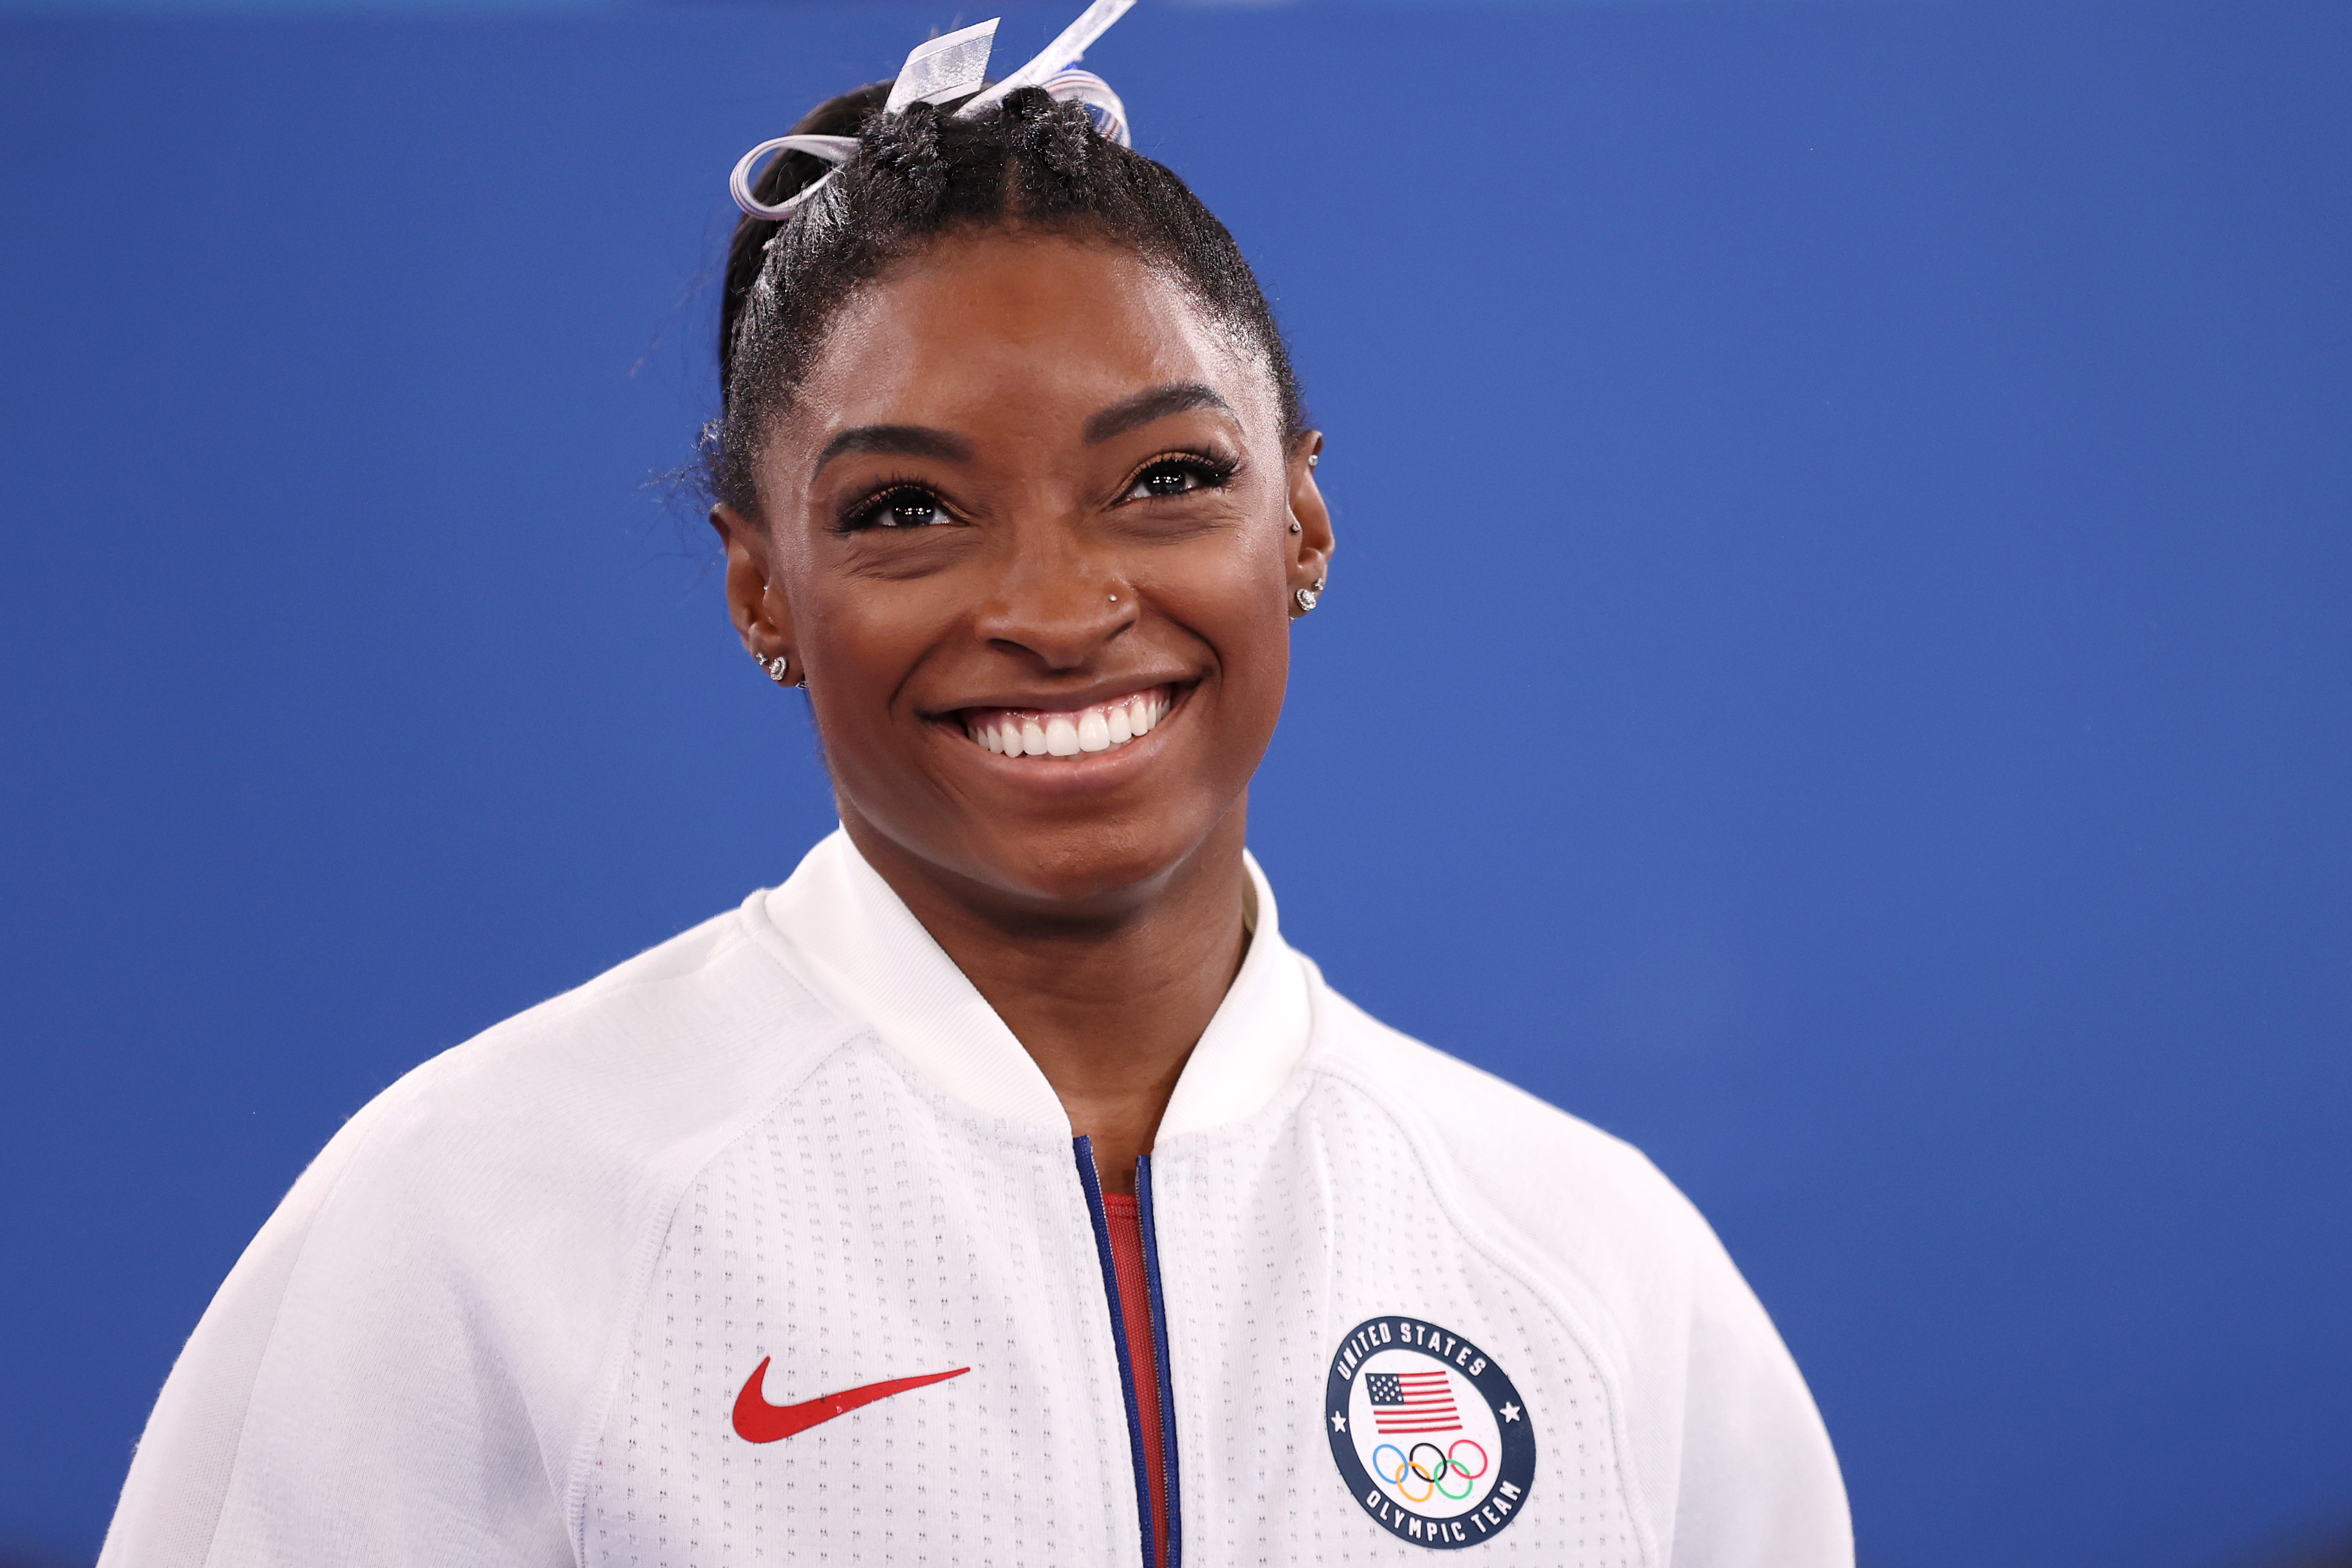 Simone Biles at Ariake Gymnastics Centre, on July 27, 2021, in Tokyo, Japan | Source: Getty Images